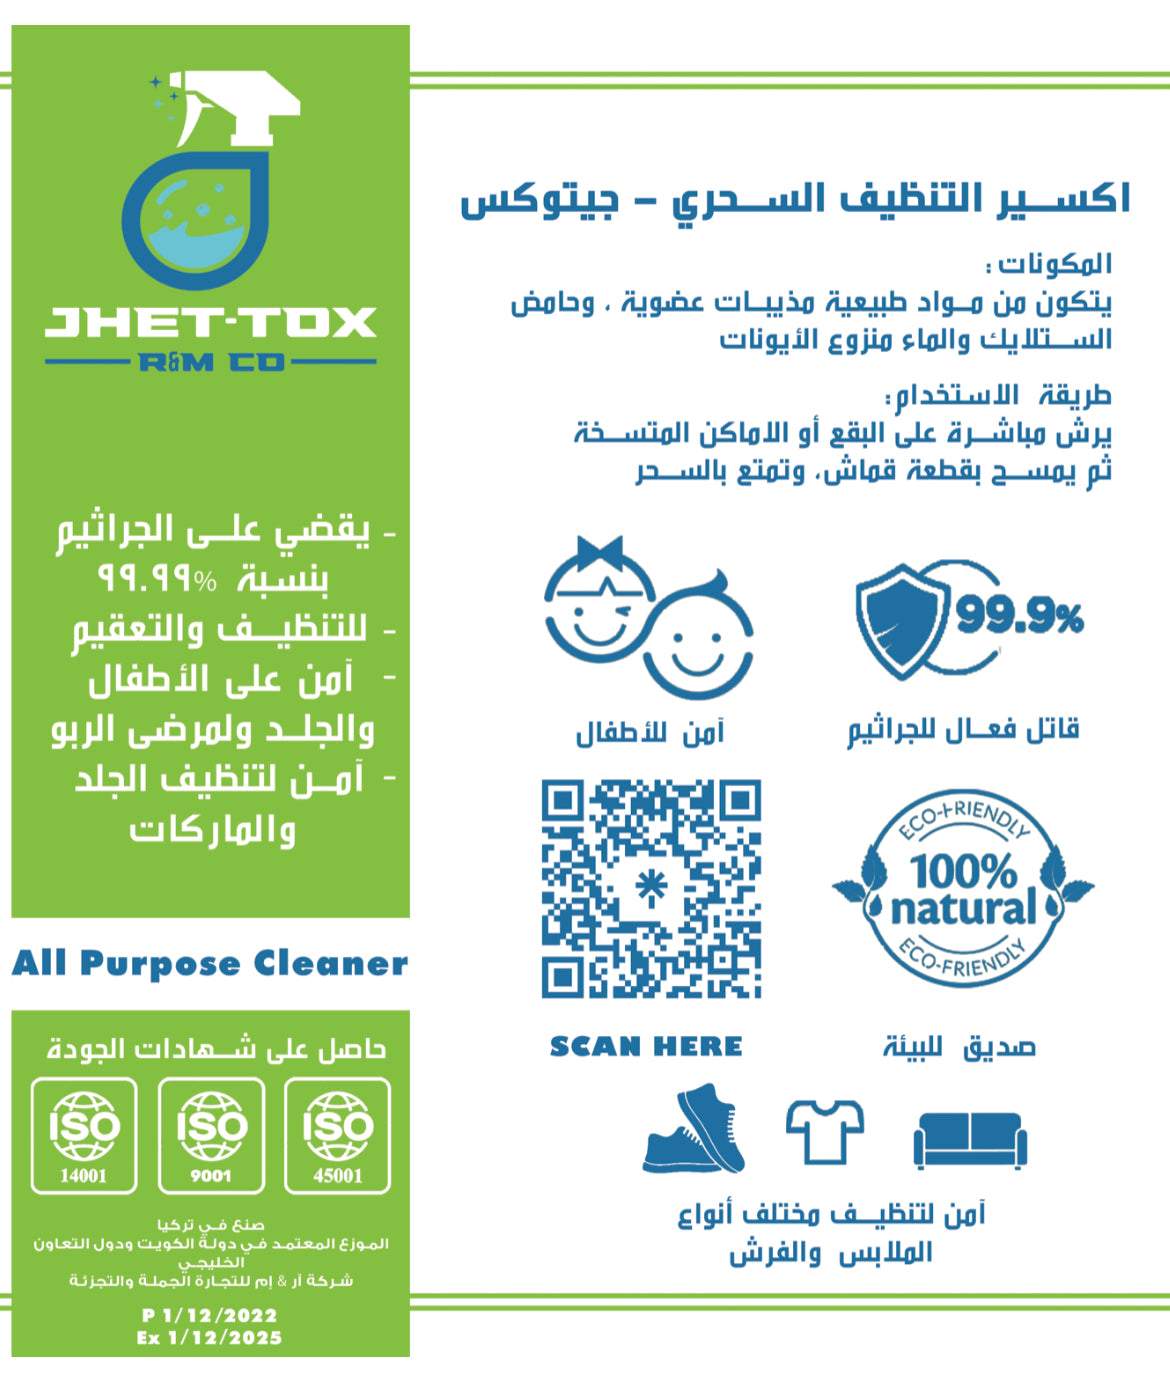 Magic cleaner - 250mL - Cleaner from [store] by JHET.TOX - CLEANER, JHET.TOX